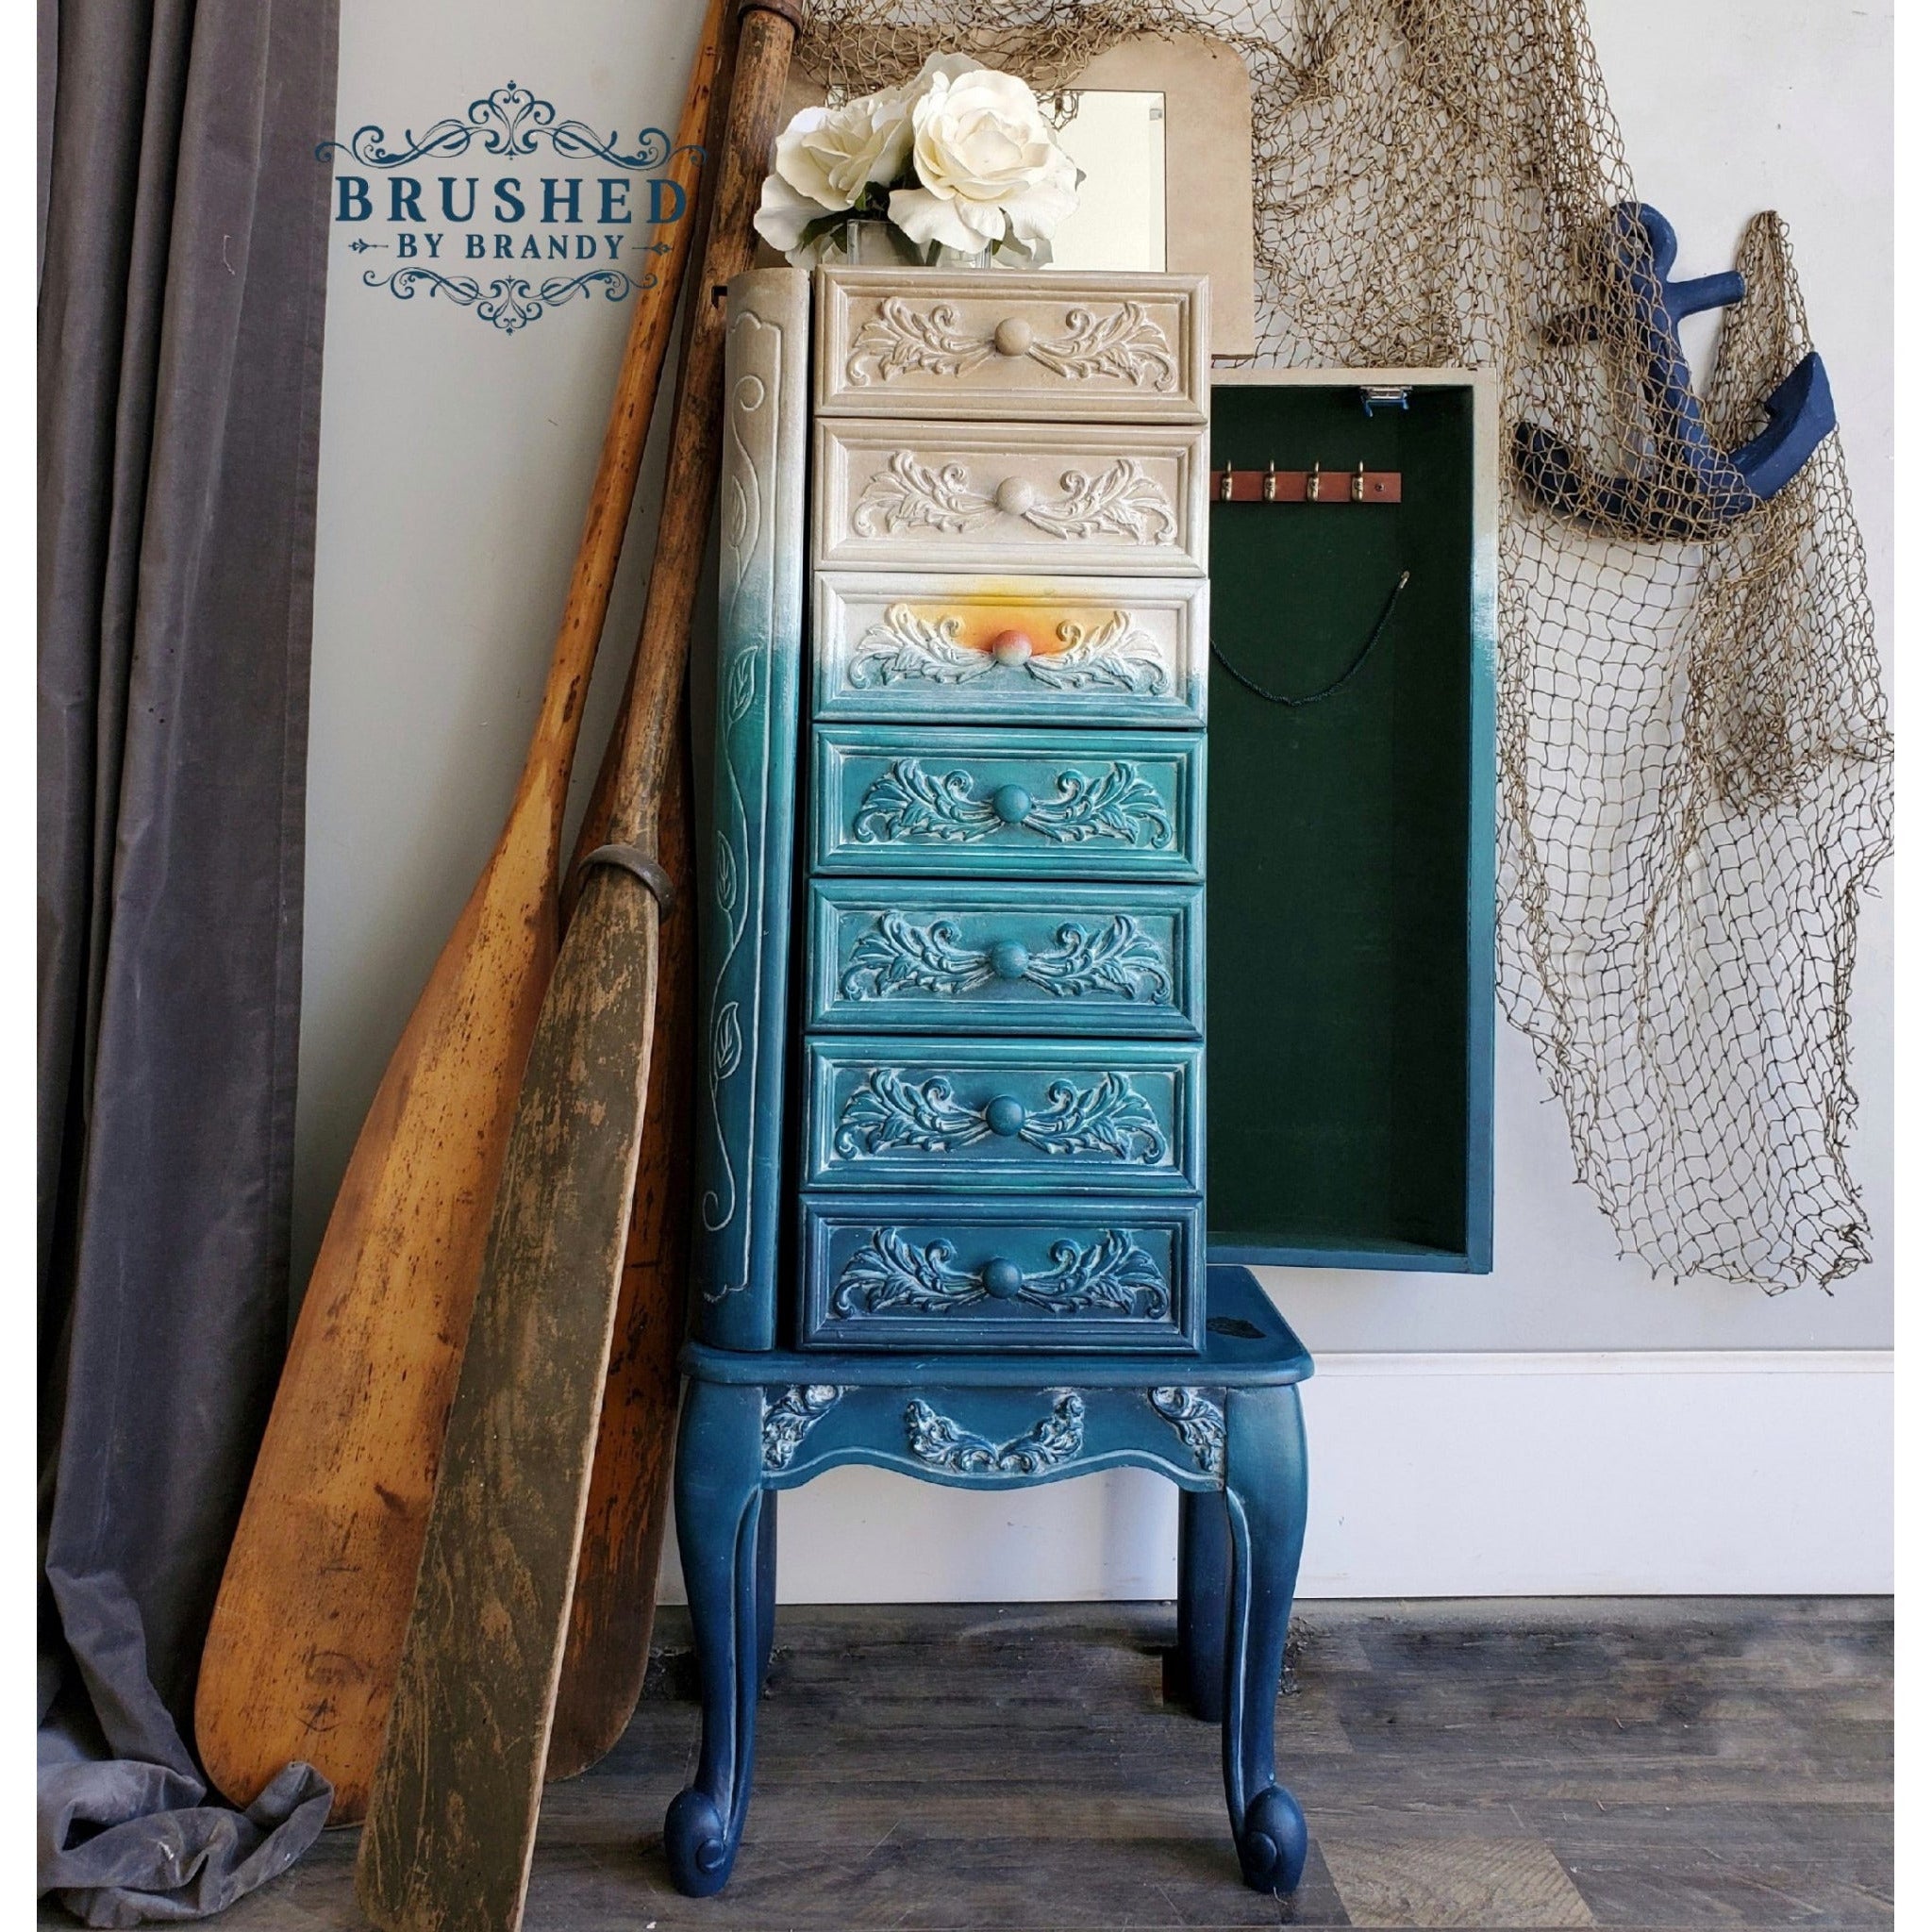 A vintage standing jewelry armoire refurbished by Brushed by Brandy is painted an ombre of tan down to blue and features ReDesign with Prima's Baroque Swirls silicone mold castings on it.